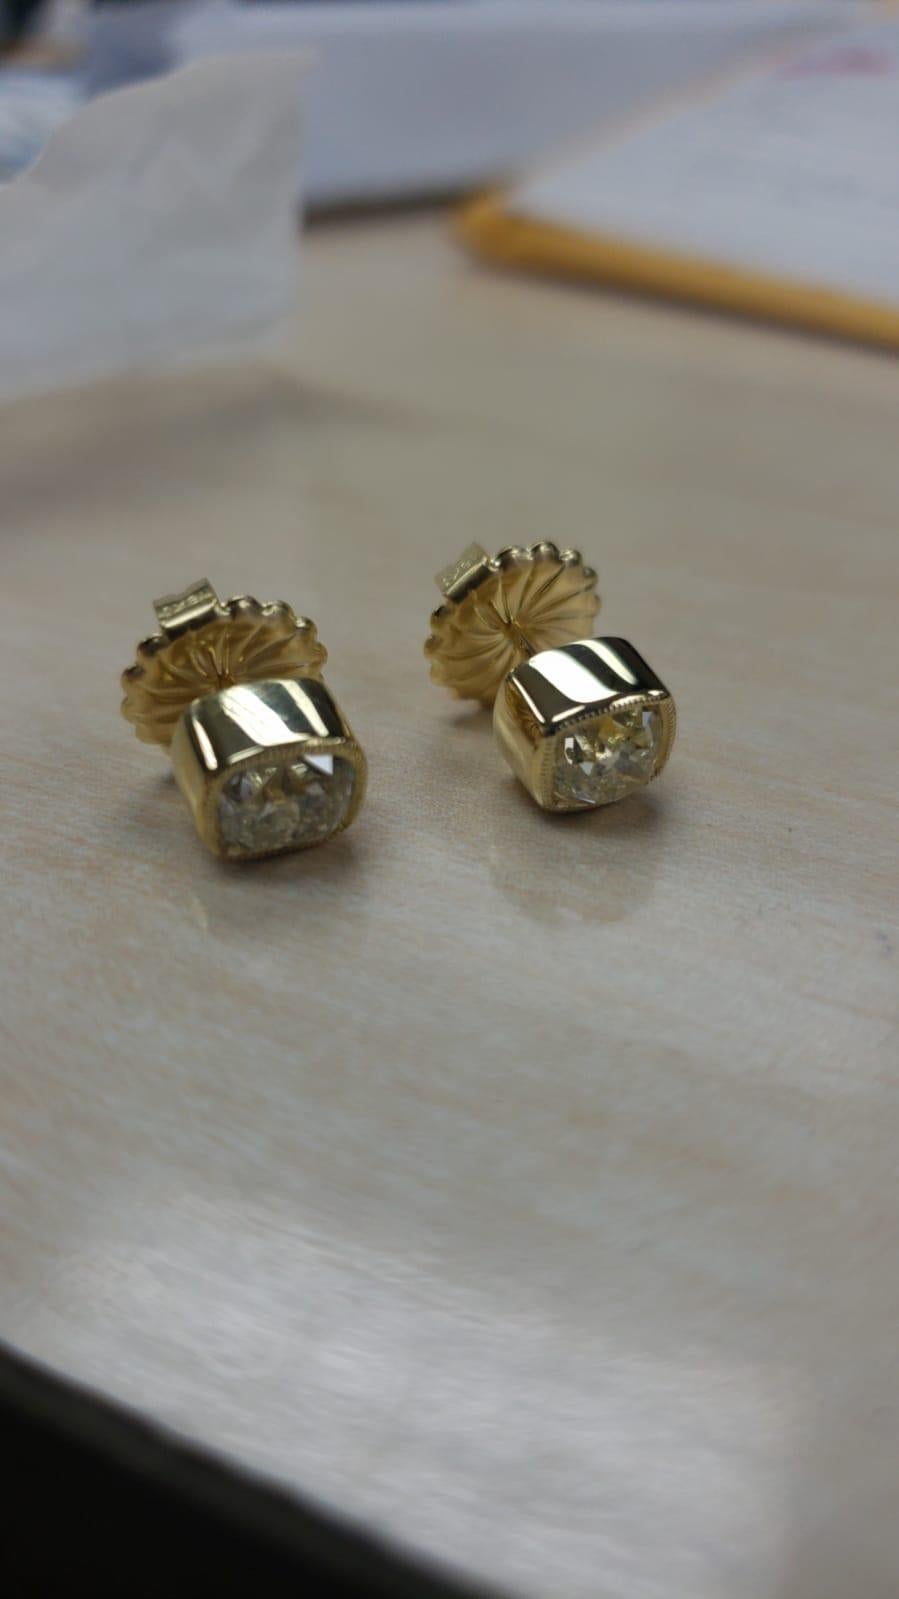 A lovely pair of old mine cut diamonds that sum together 2.13 carats.

The setting is gorgeous in solid 18 carats yellow gold and has security backs.